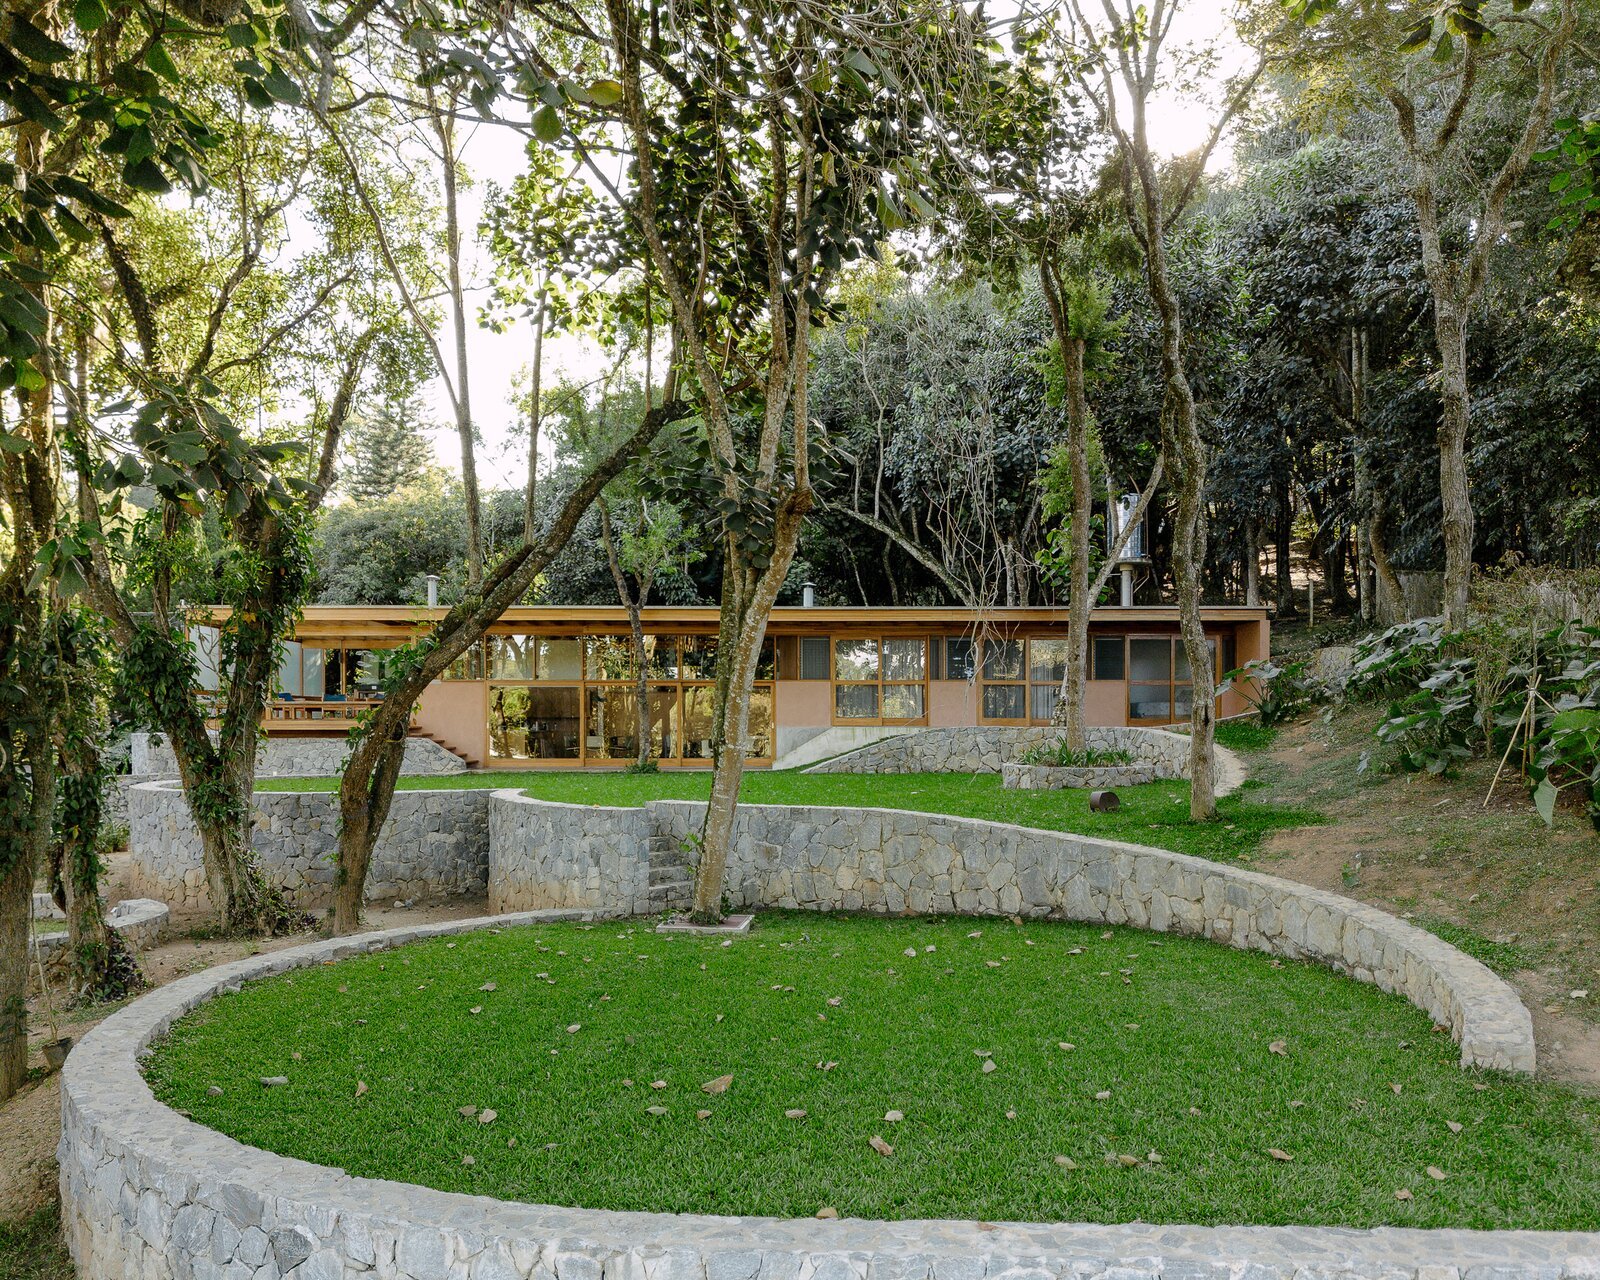 Three Circular Terraces Lift This Brazilian Home Up Amidst the Treetops